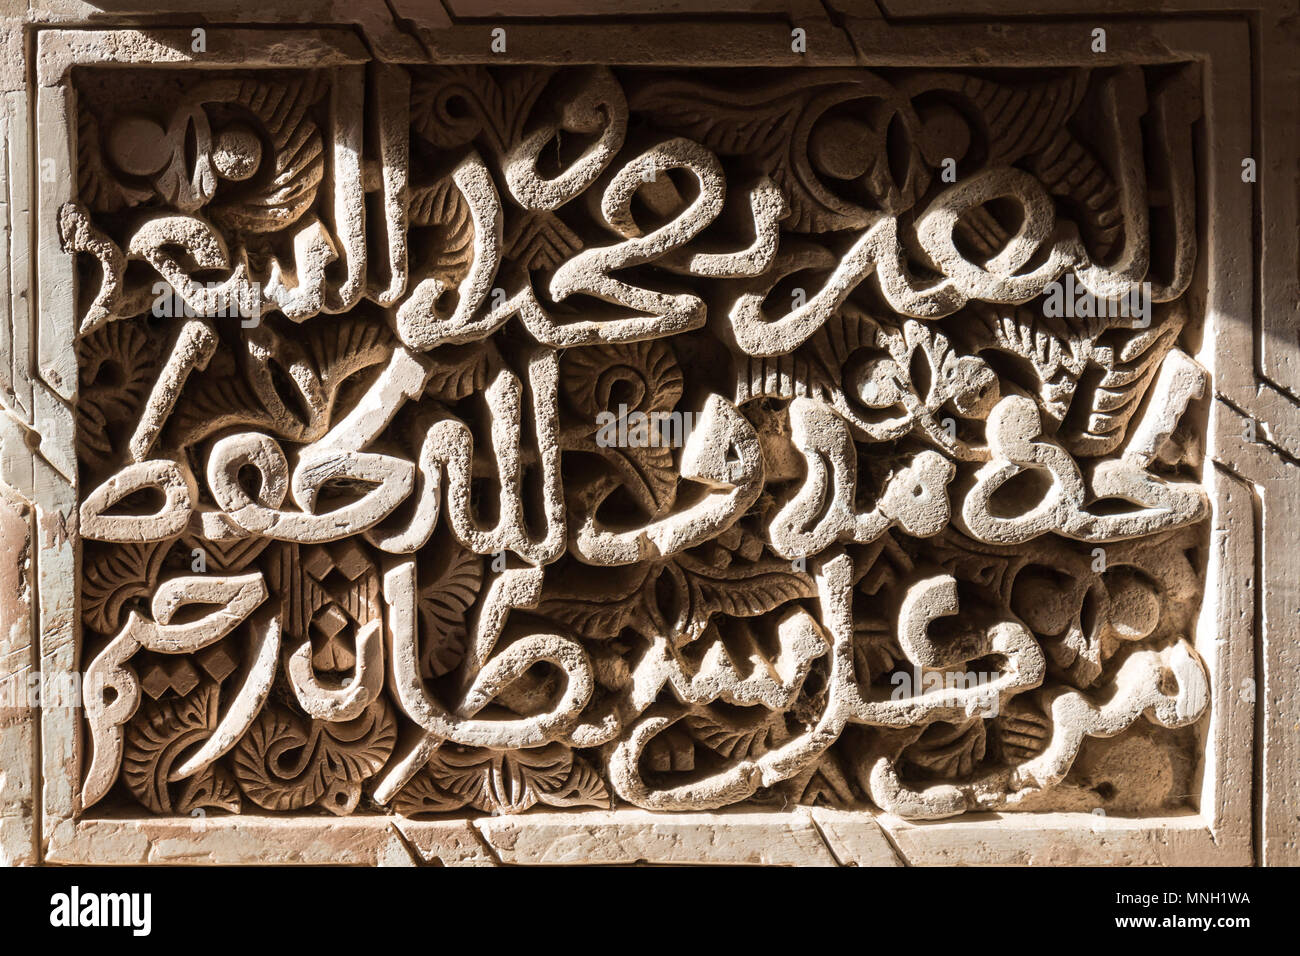 Detail on the wall of islamic school Madrasa Bou Inania in Fez, Morocco. Traditional calligraphic texts. Stock Photo